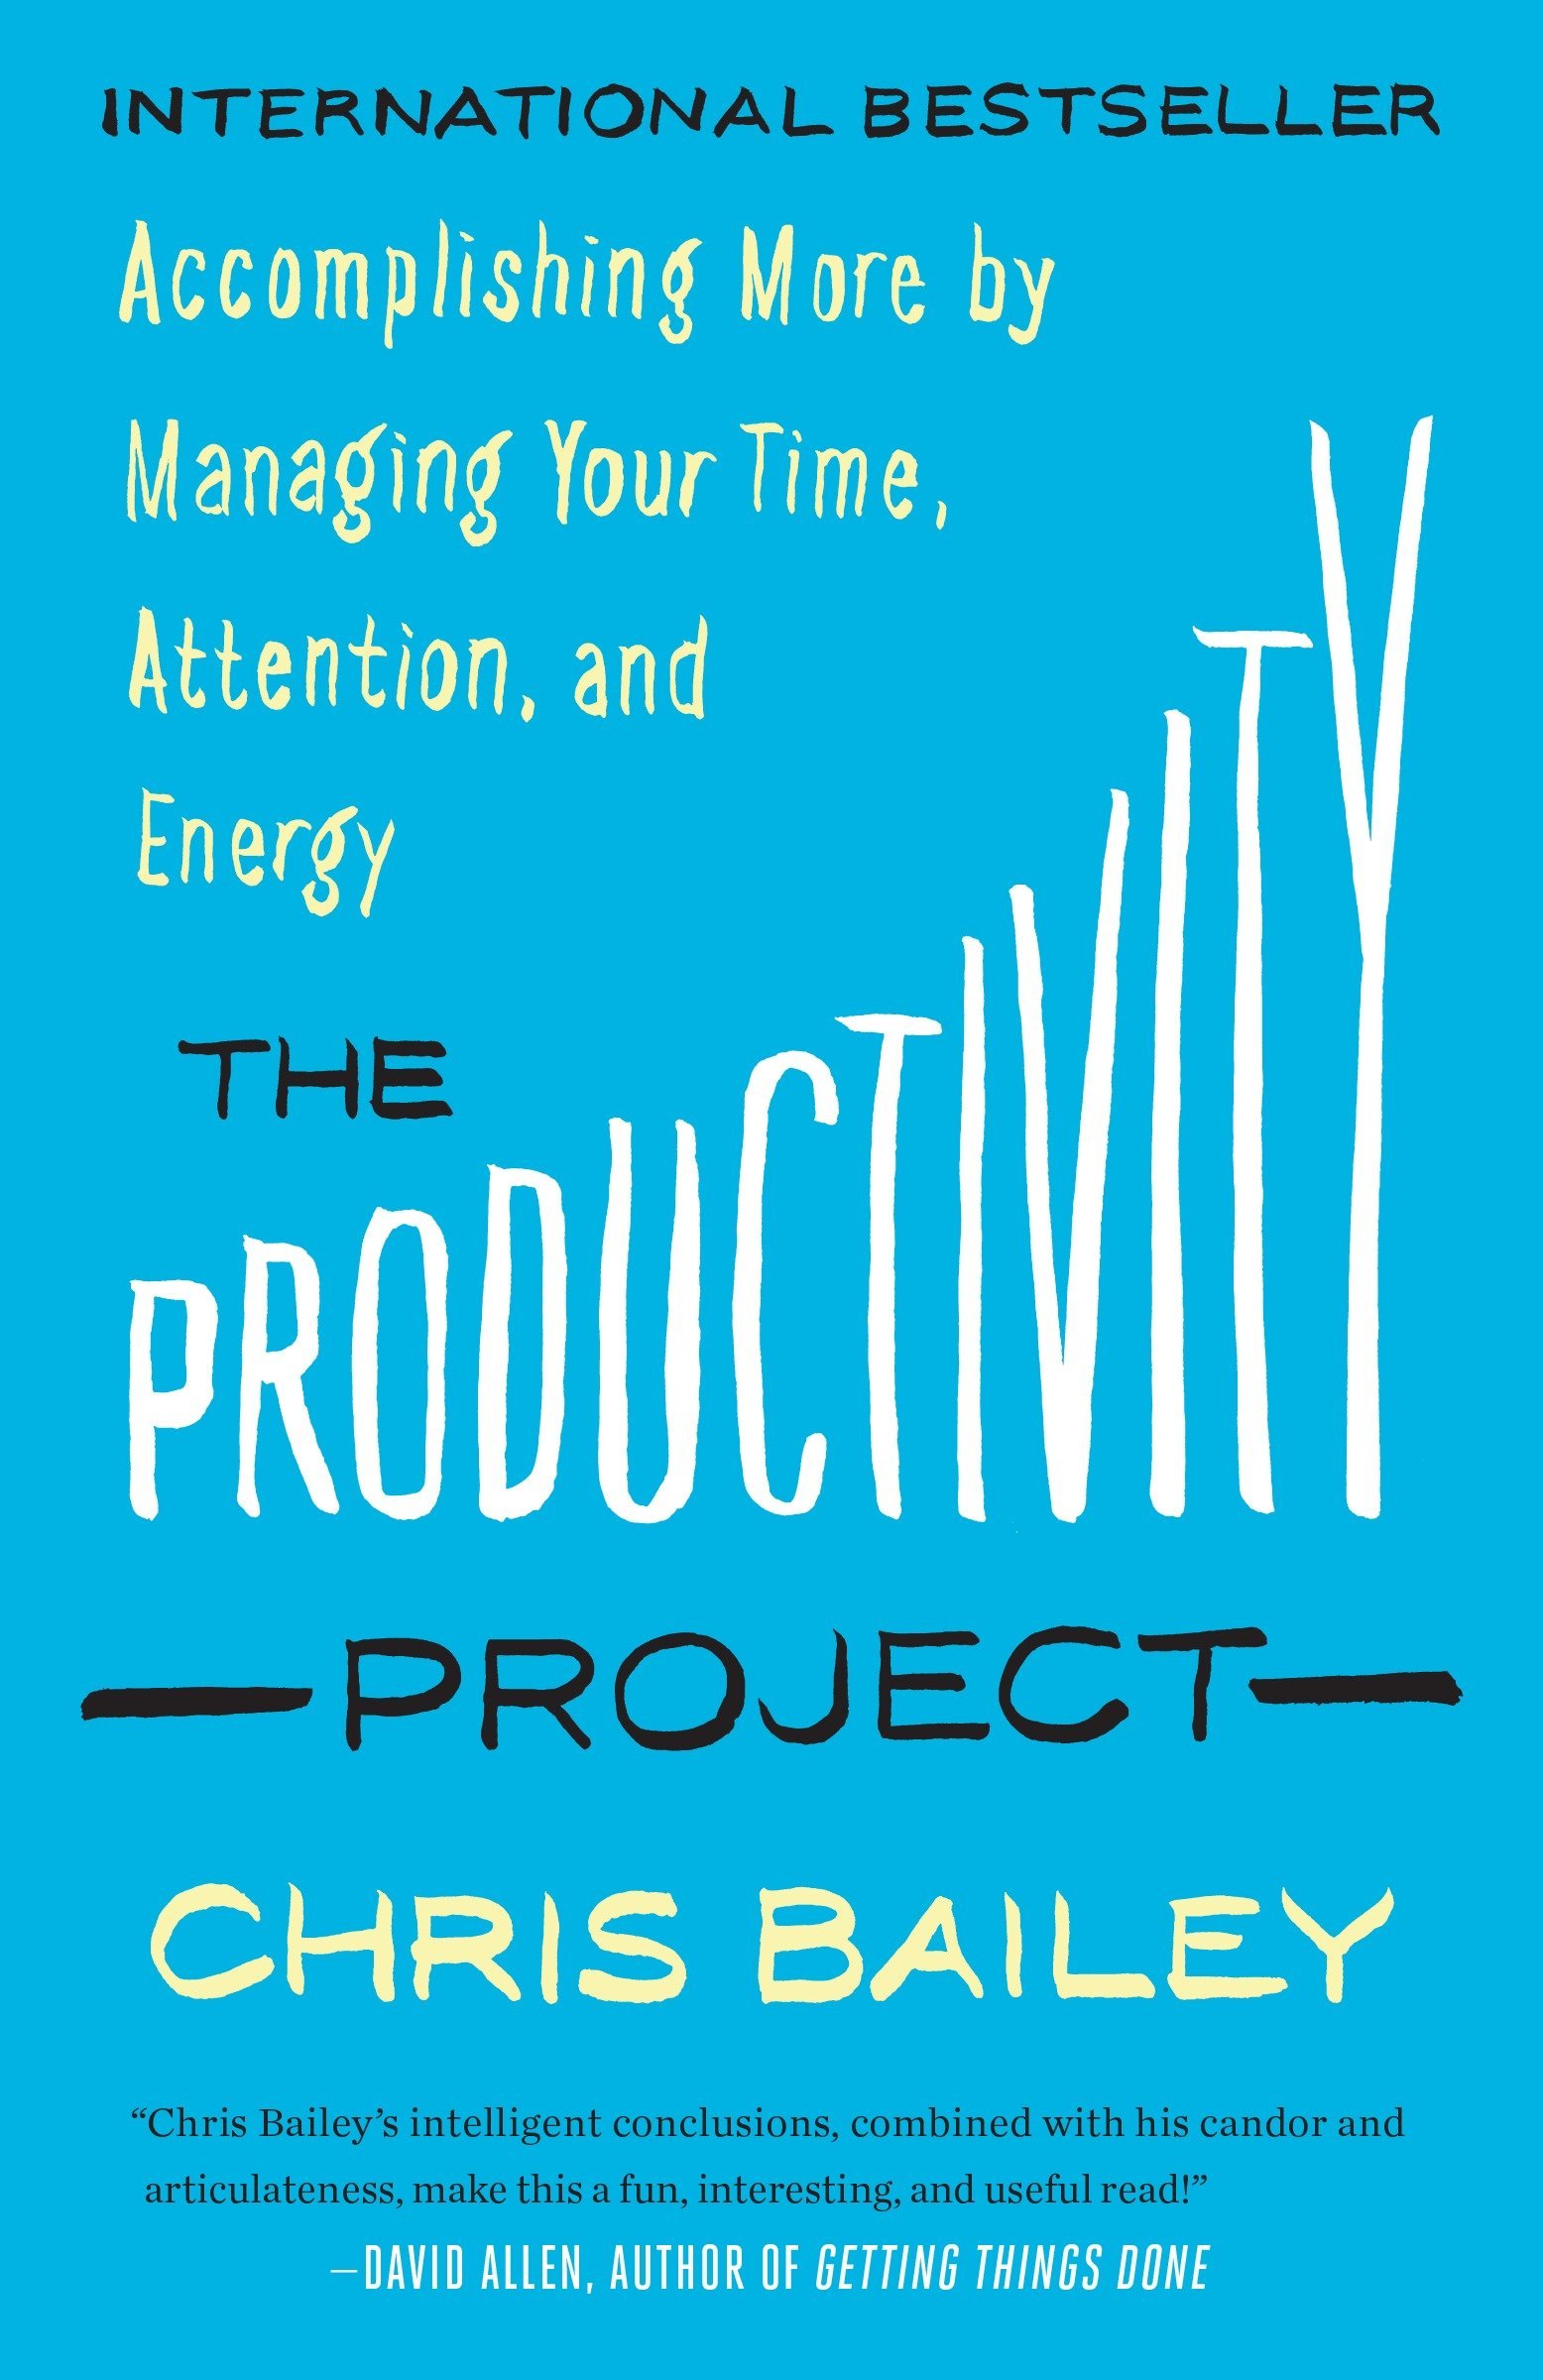 The Productivity Project Accomplishing More by Managing Your Time, Attention, and Energy